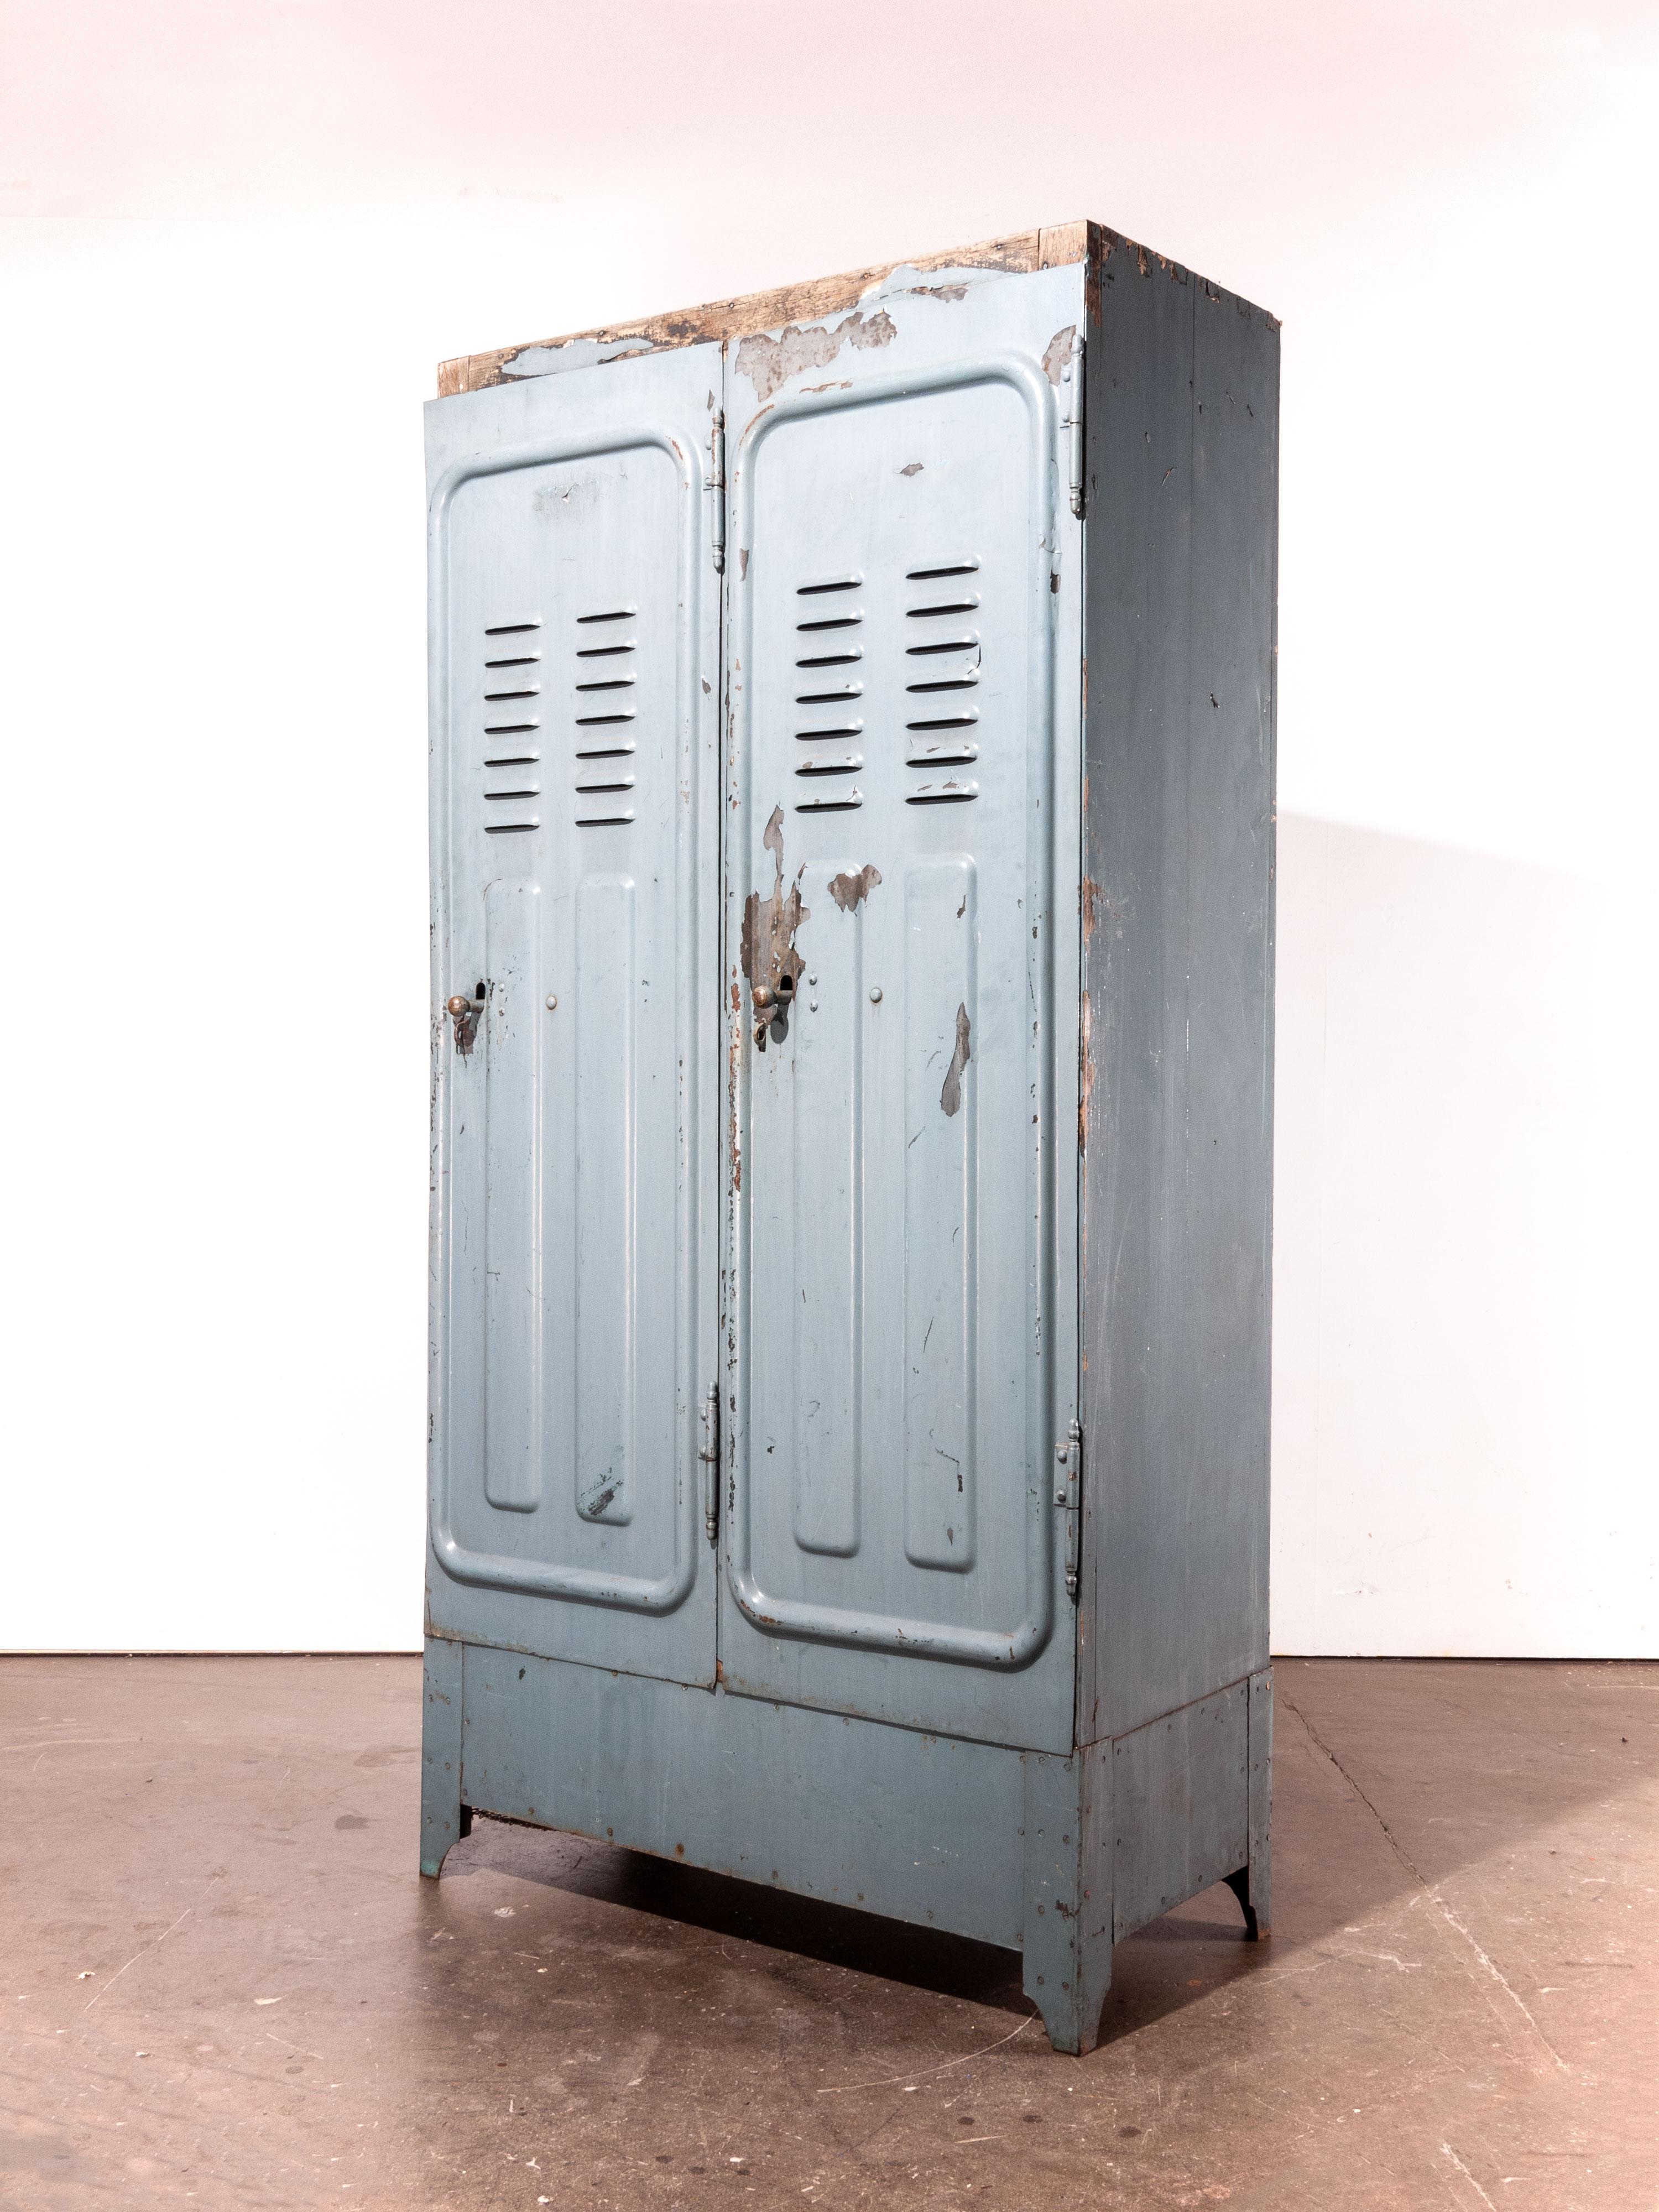 1930s original wooden locker, storage cupboard by De Dietrich
An exceptional 1930s original wooden locker by De Dietrich of Reichenshoffen. De Dietrich was founded in 1684 and was the first industrial company to create a logo (a hunting horn)